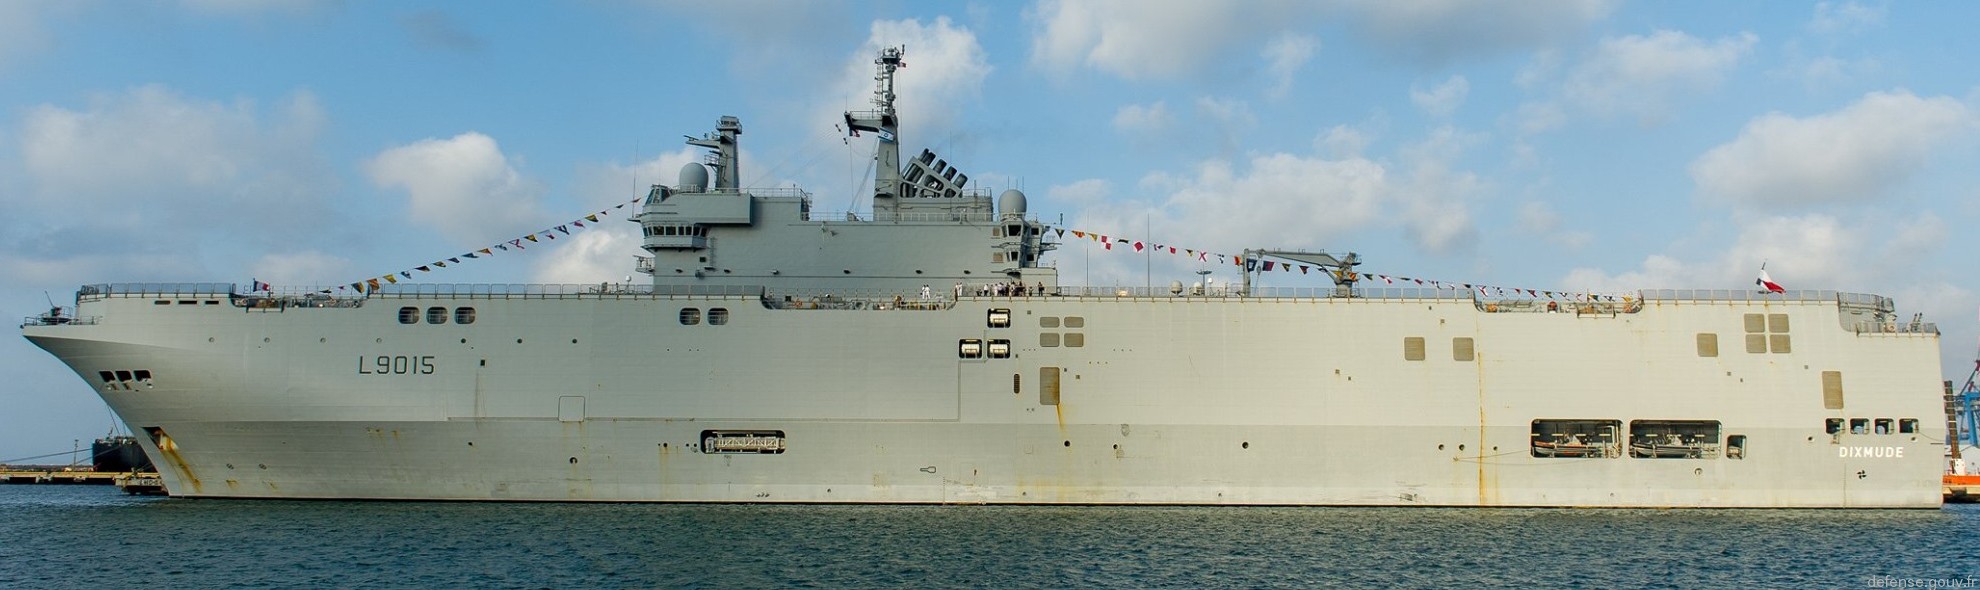 l-9015 fs dixmude mistral class amphibious assault command ship bpc french navy marine nationale 57